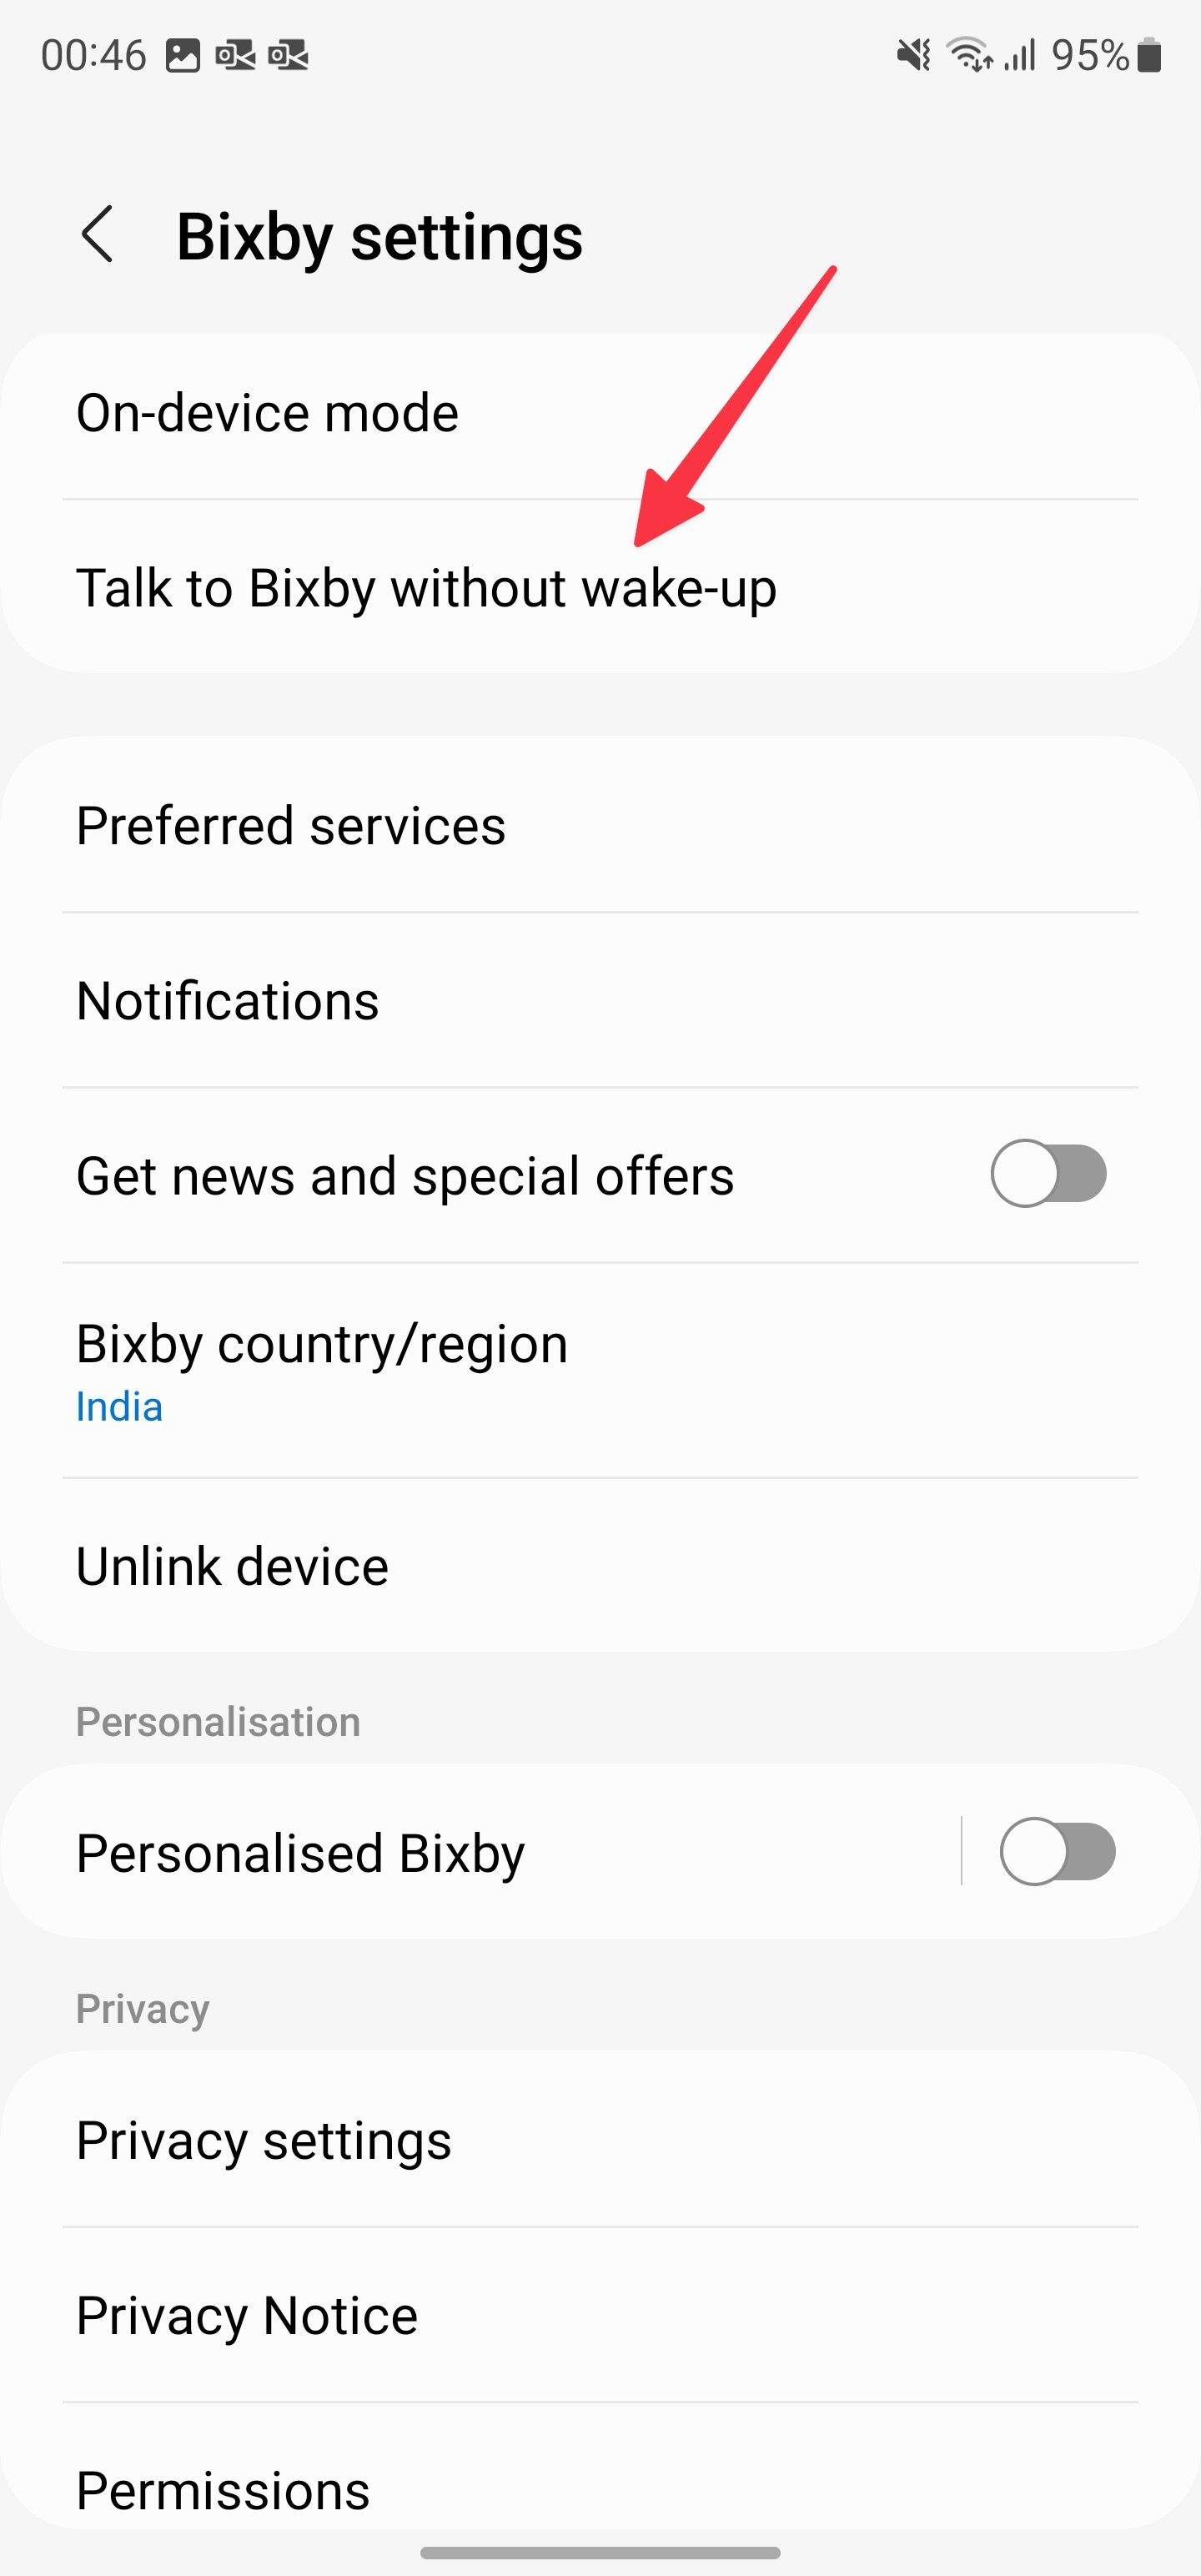 Talk to bixby without wake up